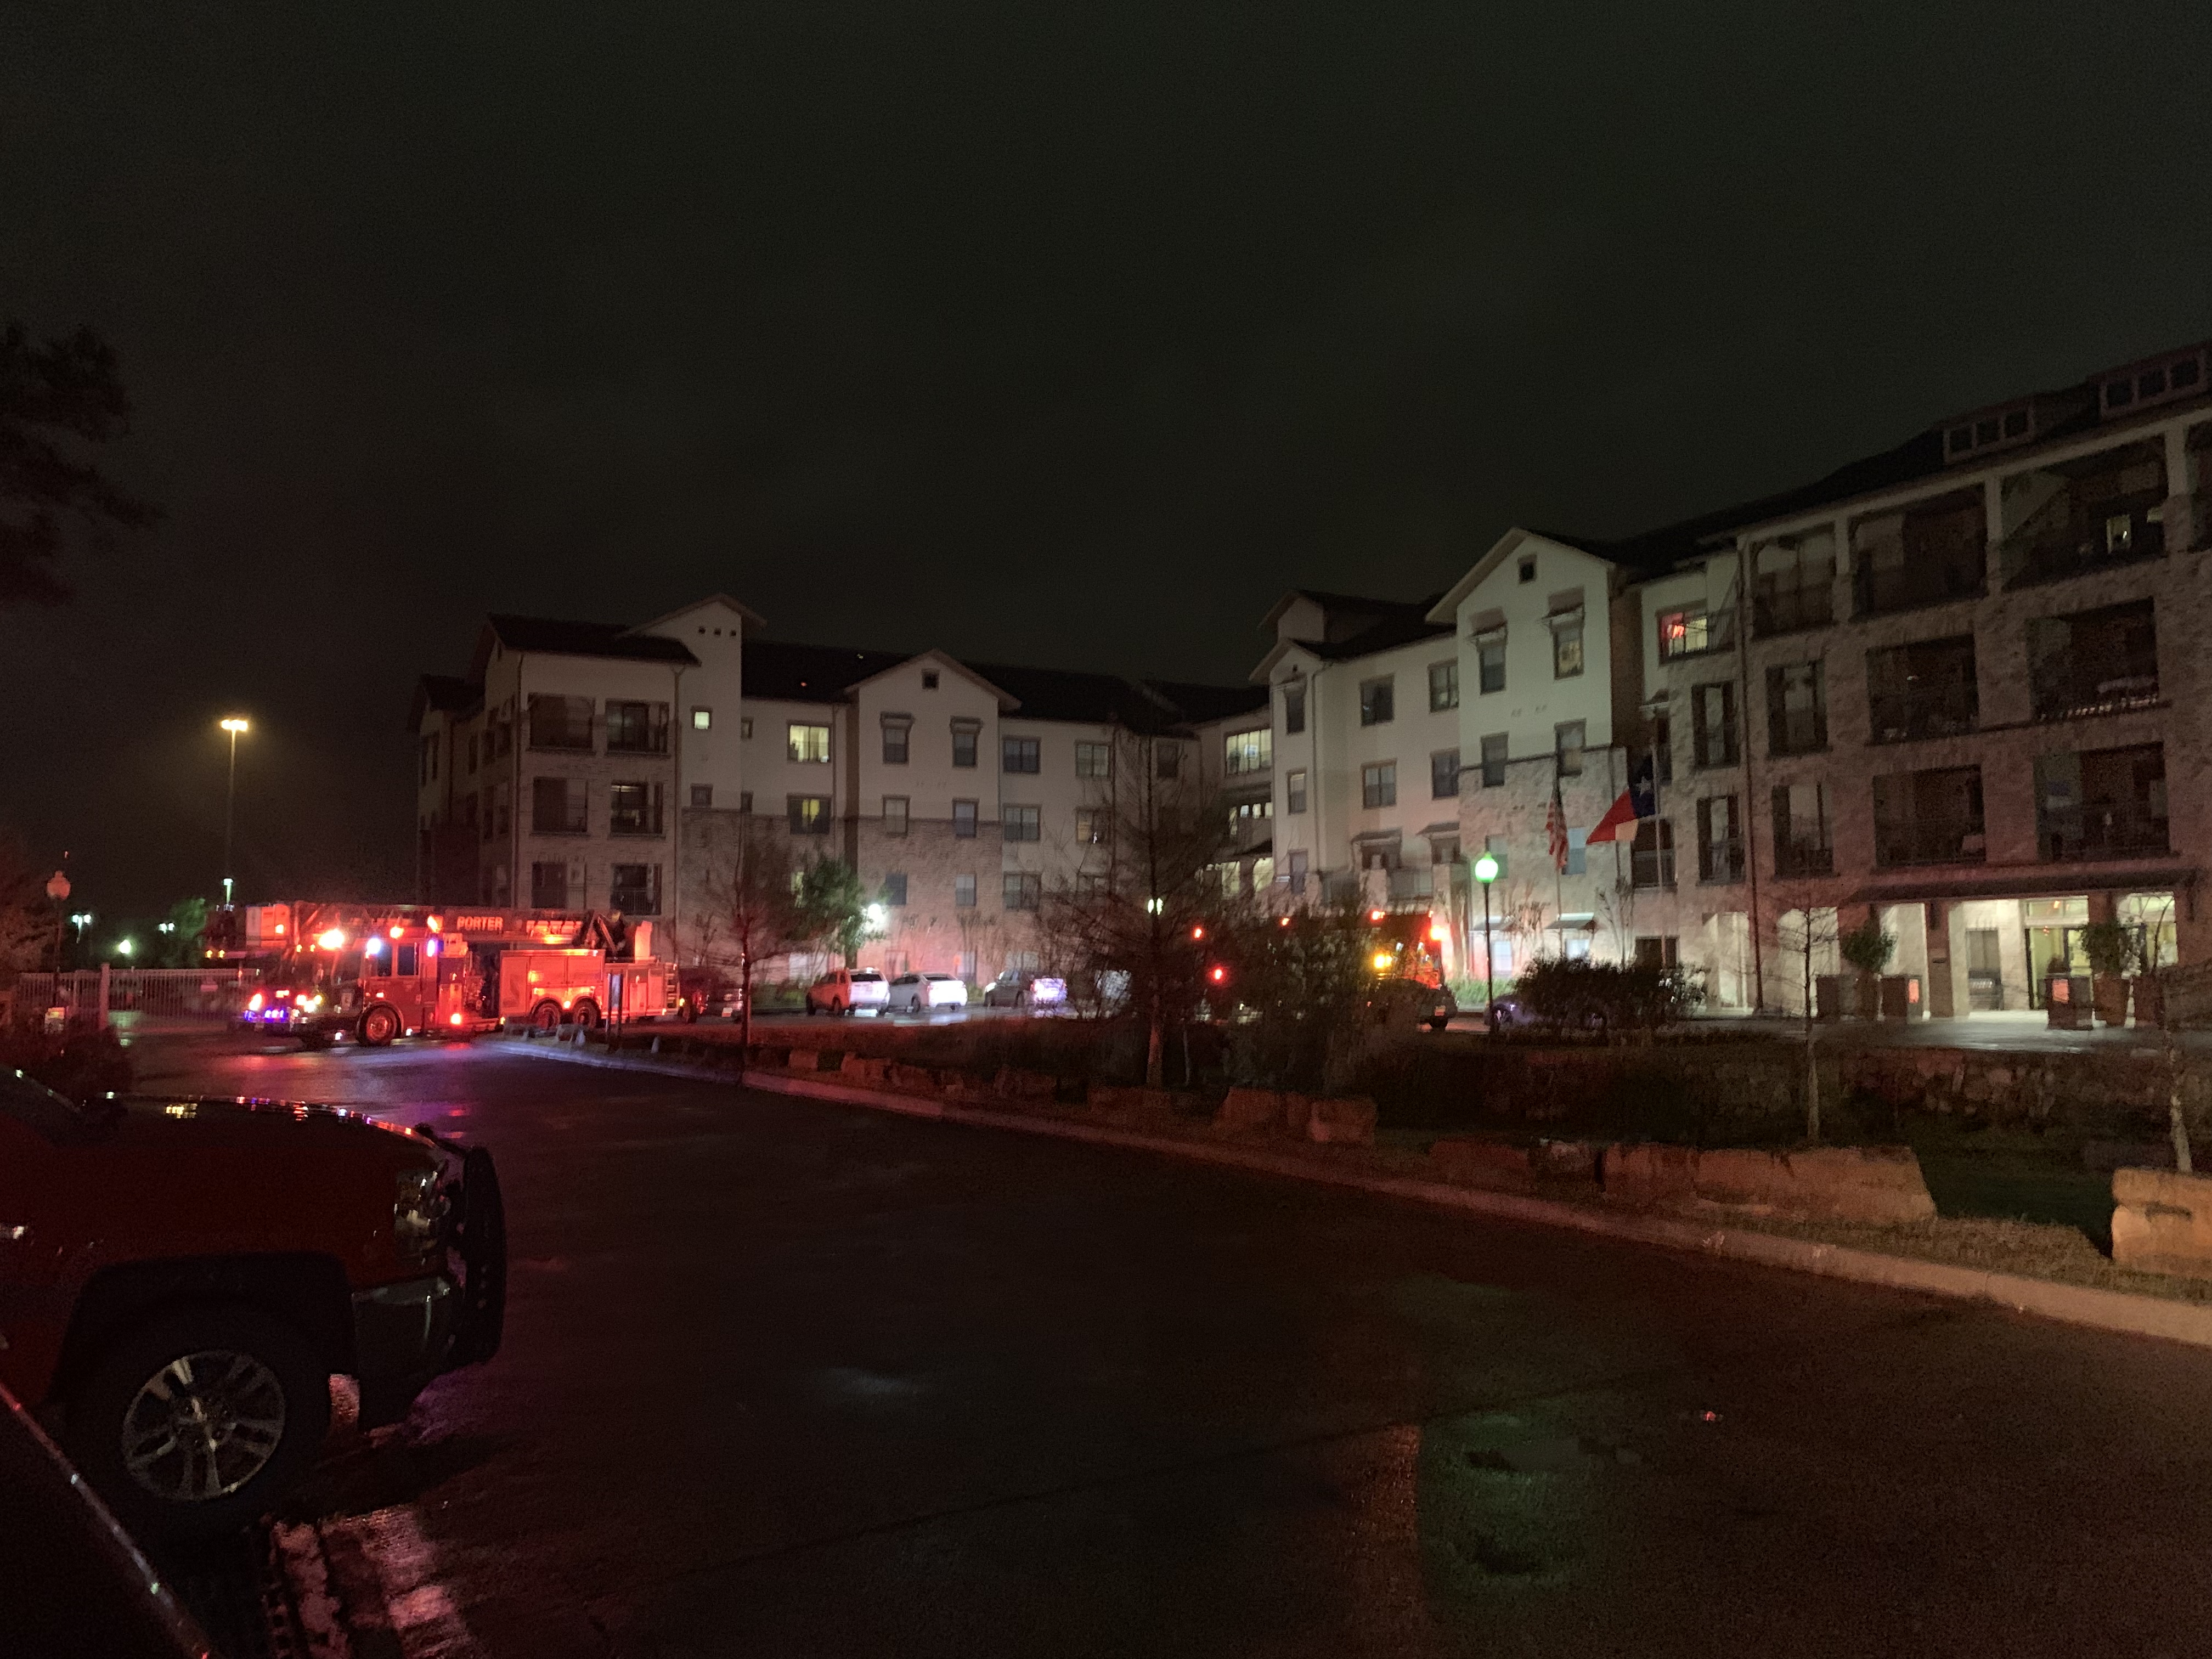 SMOKE SCARE IN KINGWOOD ASSISTED LIVING COMPLEX